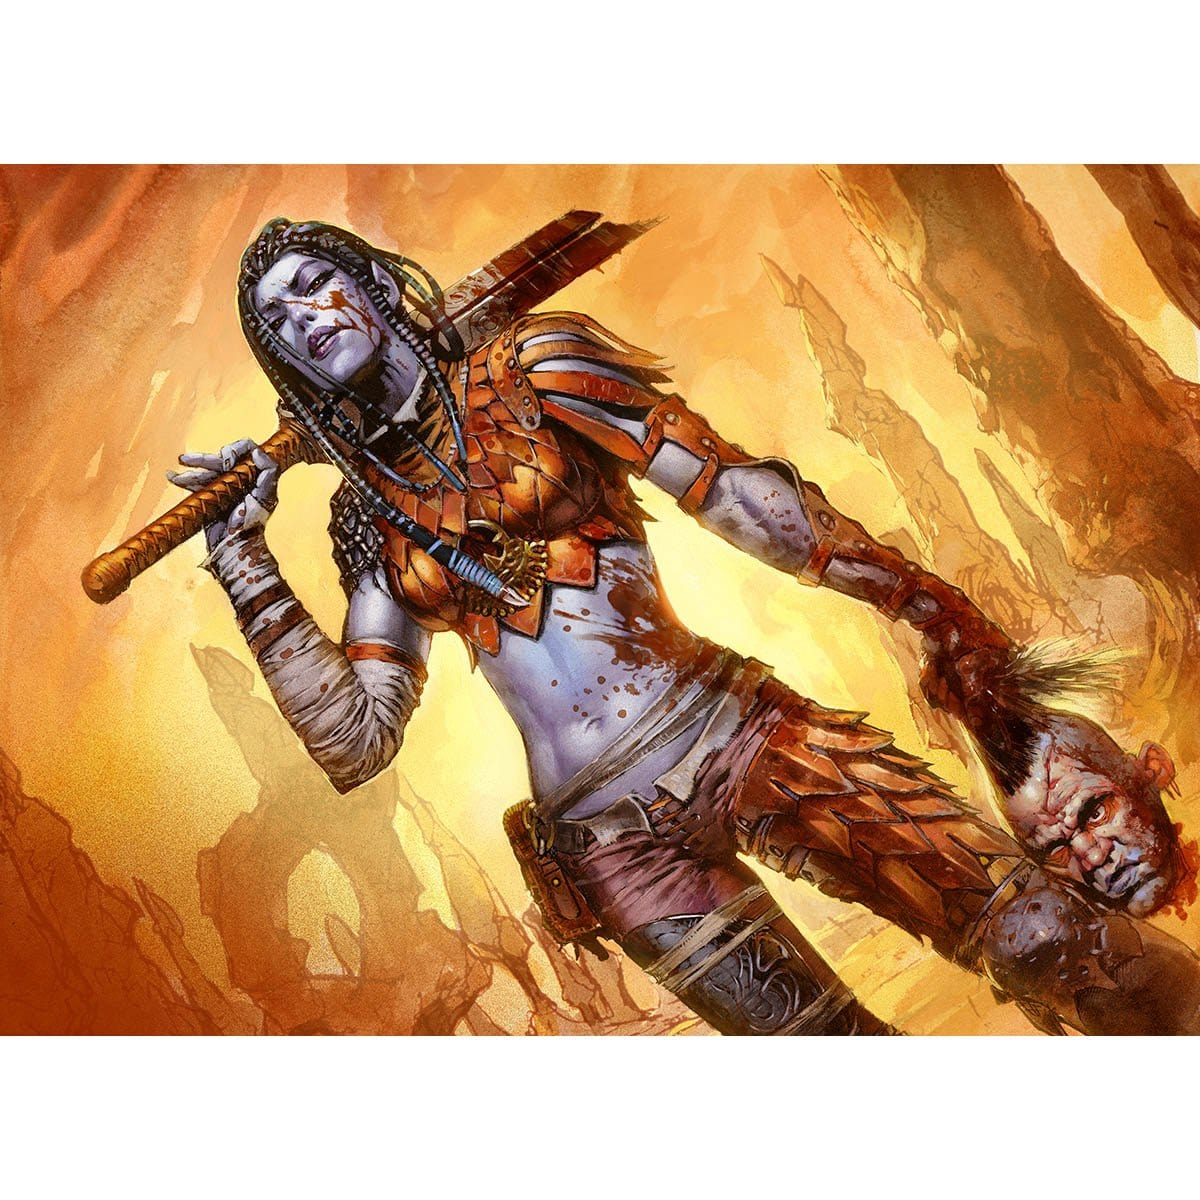 Radha, Heir to Keld Print - Print - Original Magic Art - Accessories for Magic the Gathering and other card games